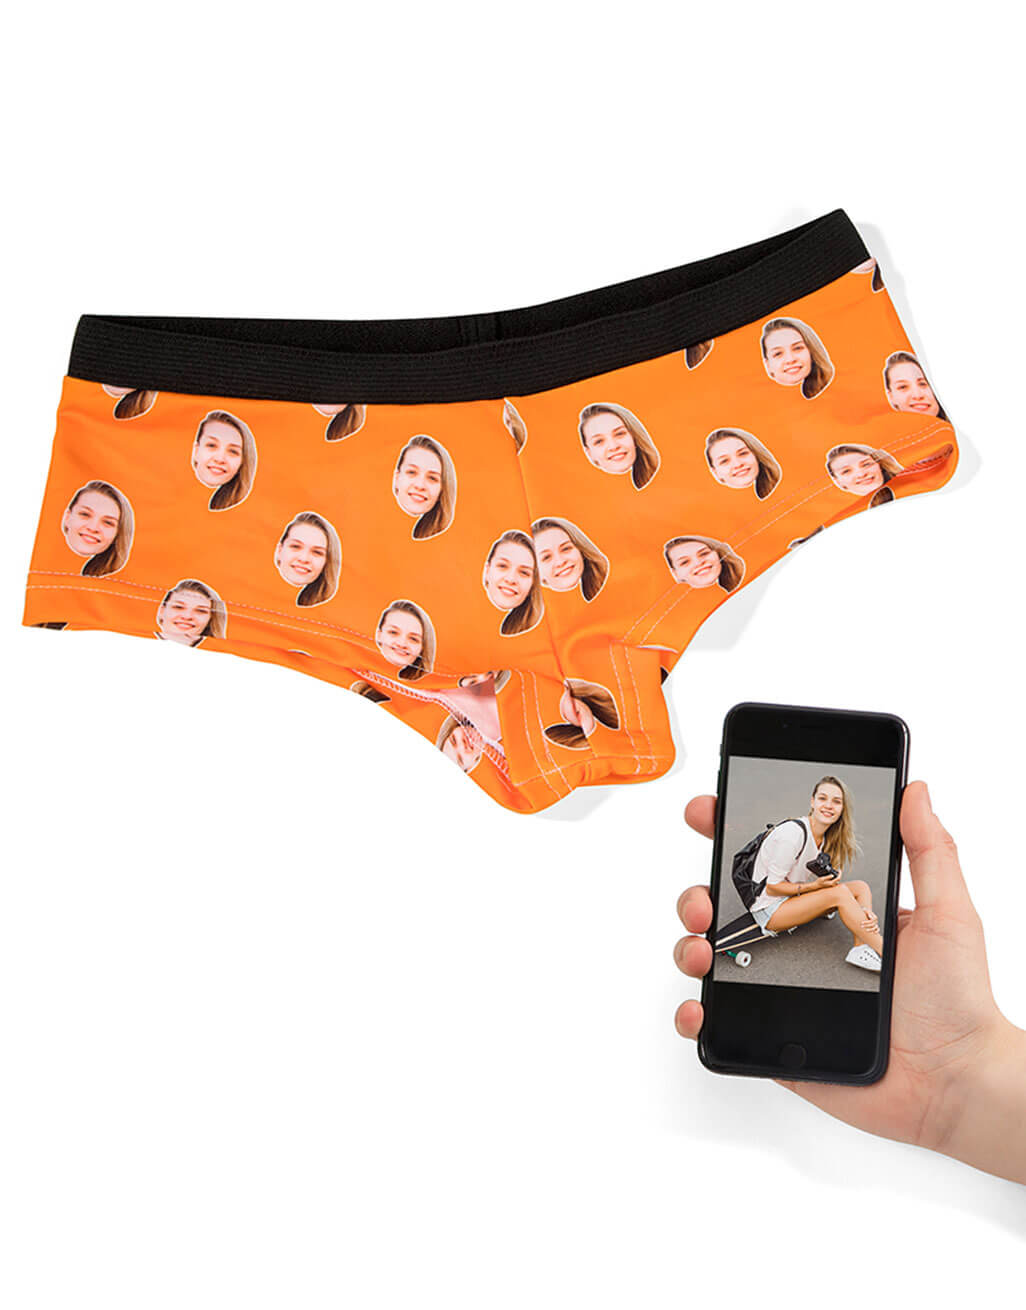 Your Face On Knickers